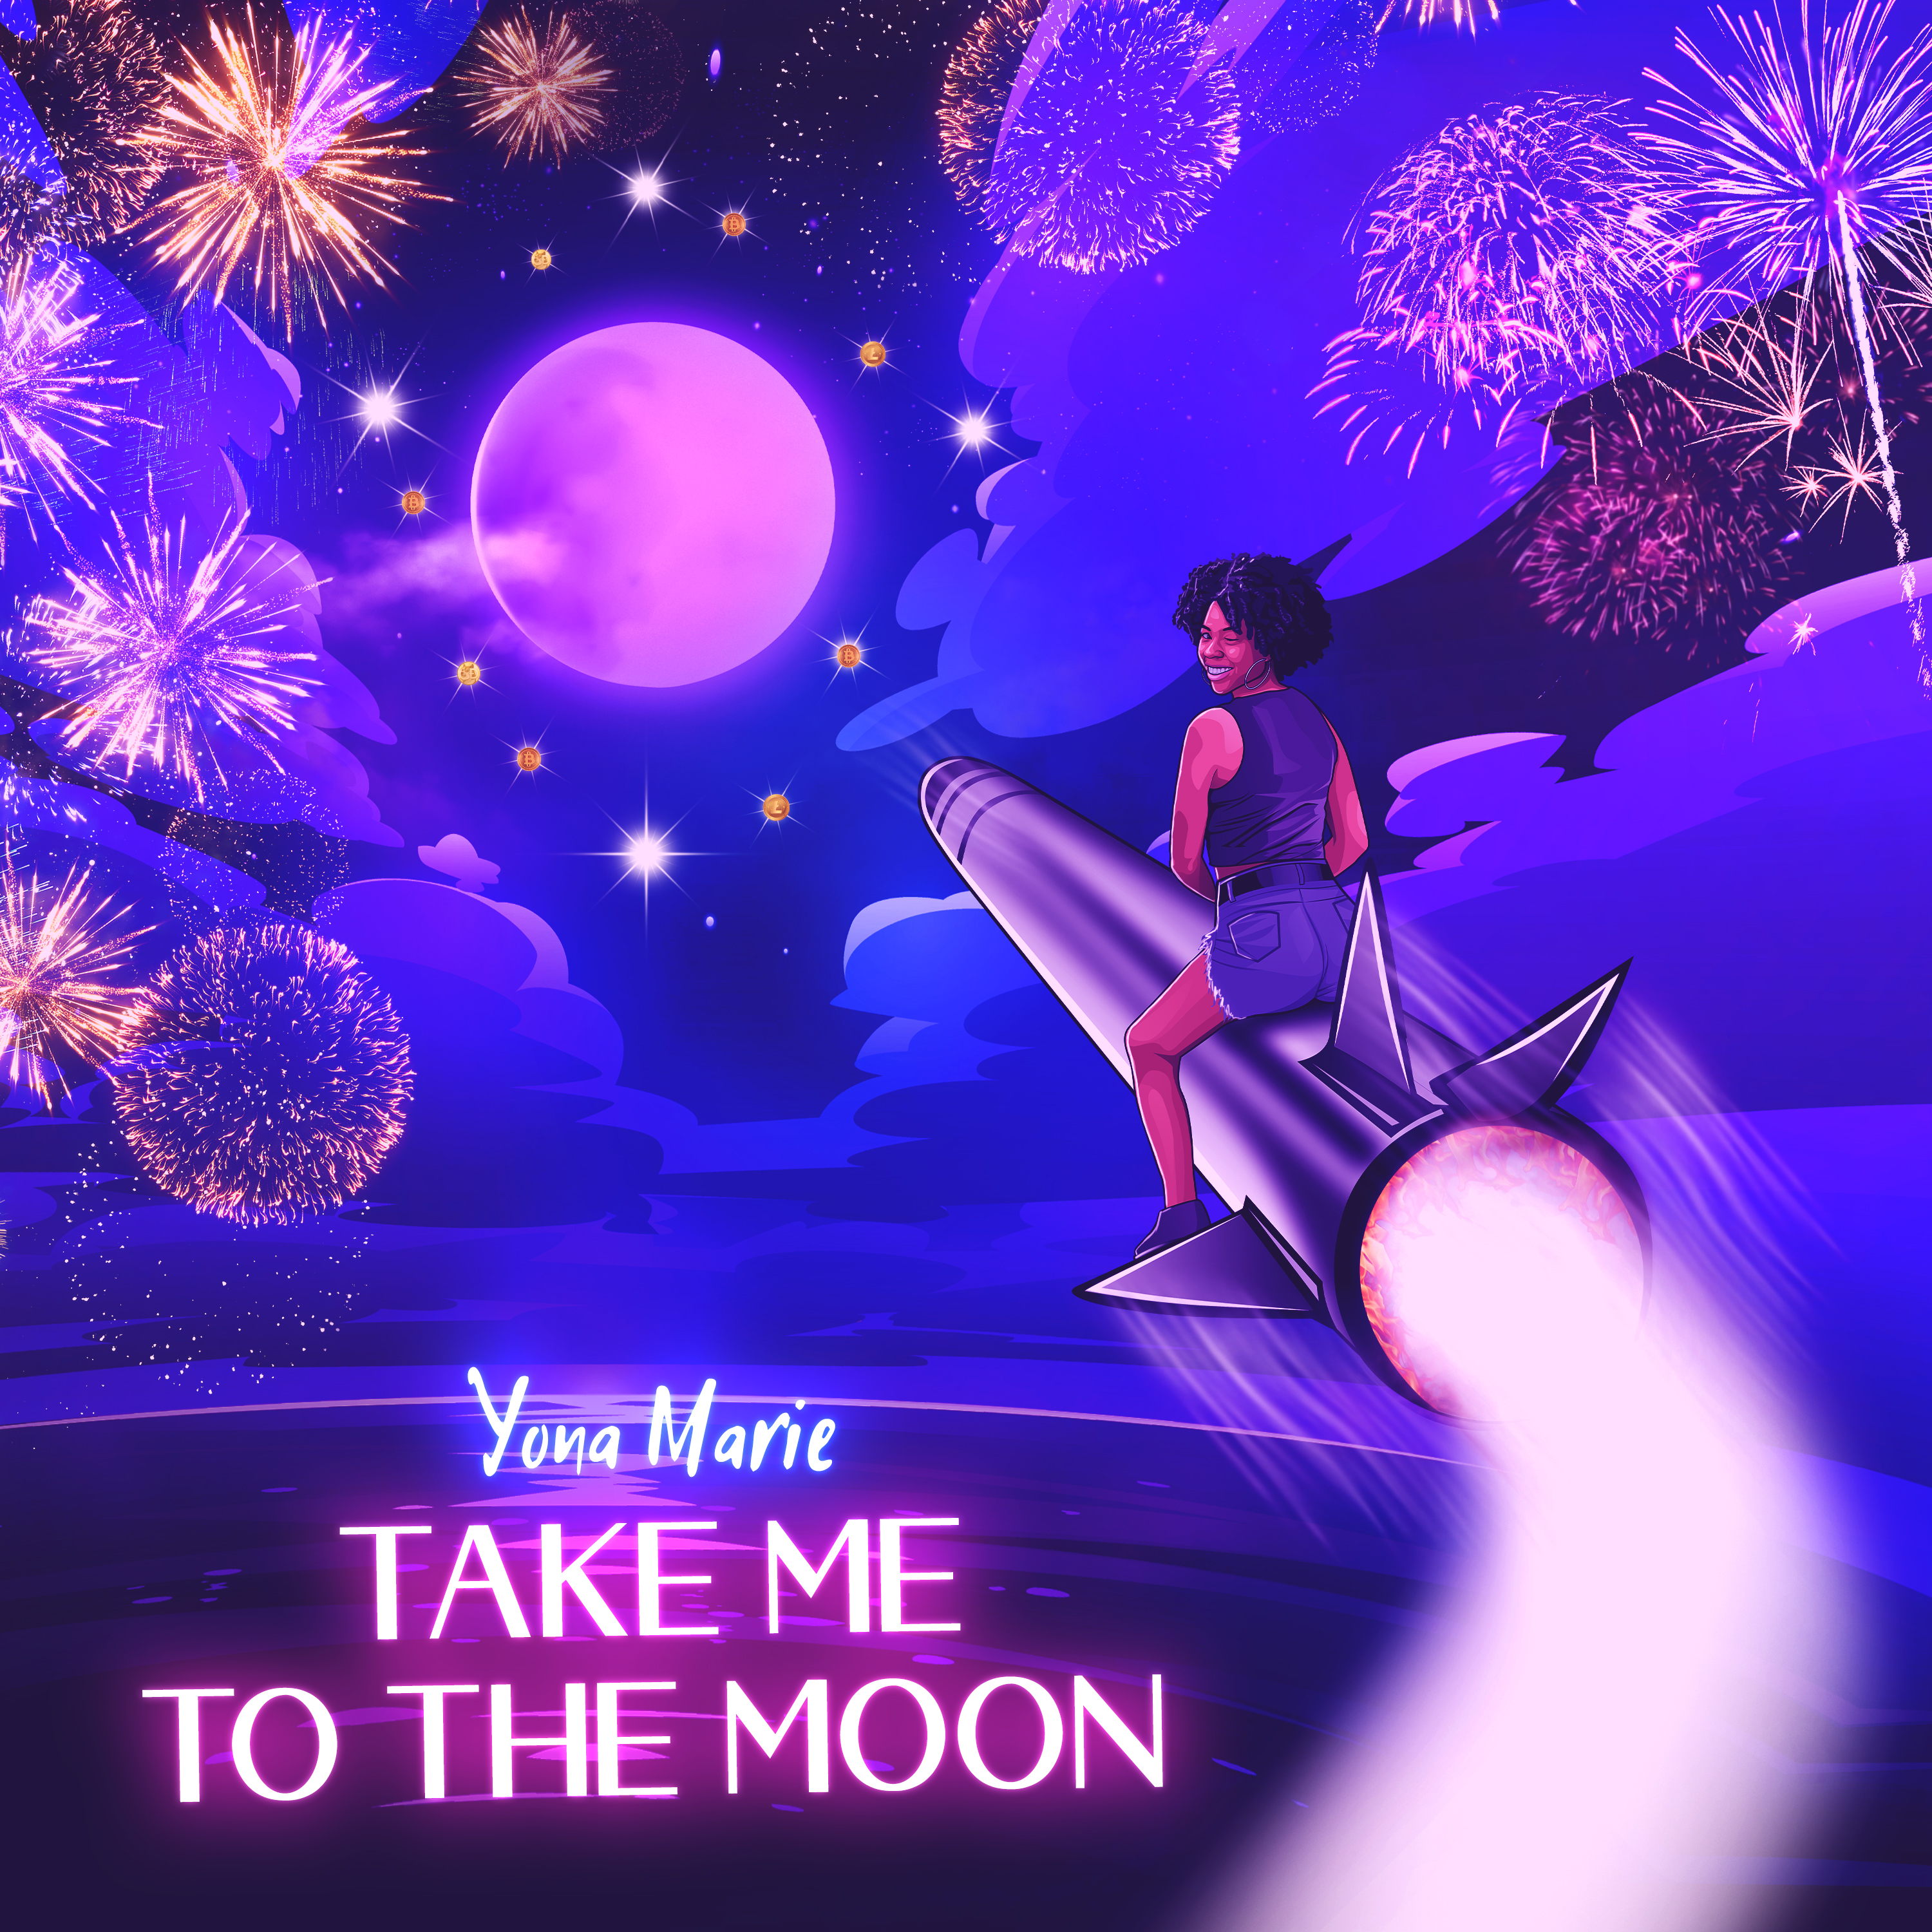 CoverArt for Yona Marie's single 'Take Me to the Moon' features a drawing of an African American woman  with curly afro, blue tank top and jean shorts sitting on a moving rocket that is headed to the moon while fireworks go off. She is looking back at us smiling.